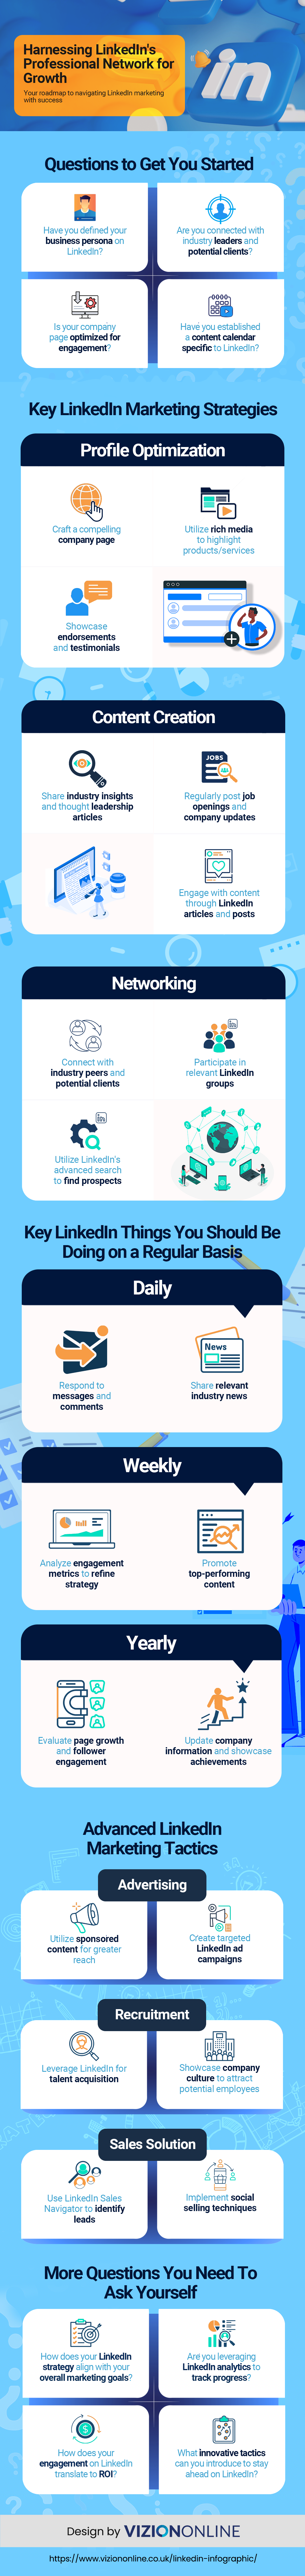 Harnessing Linkedin’s Professional Network For Growth - Infographic